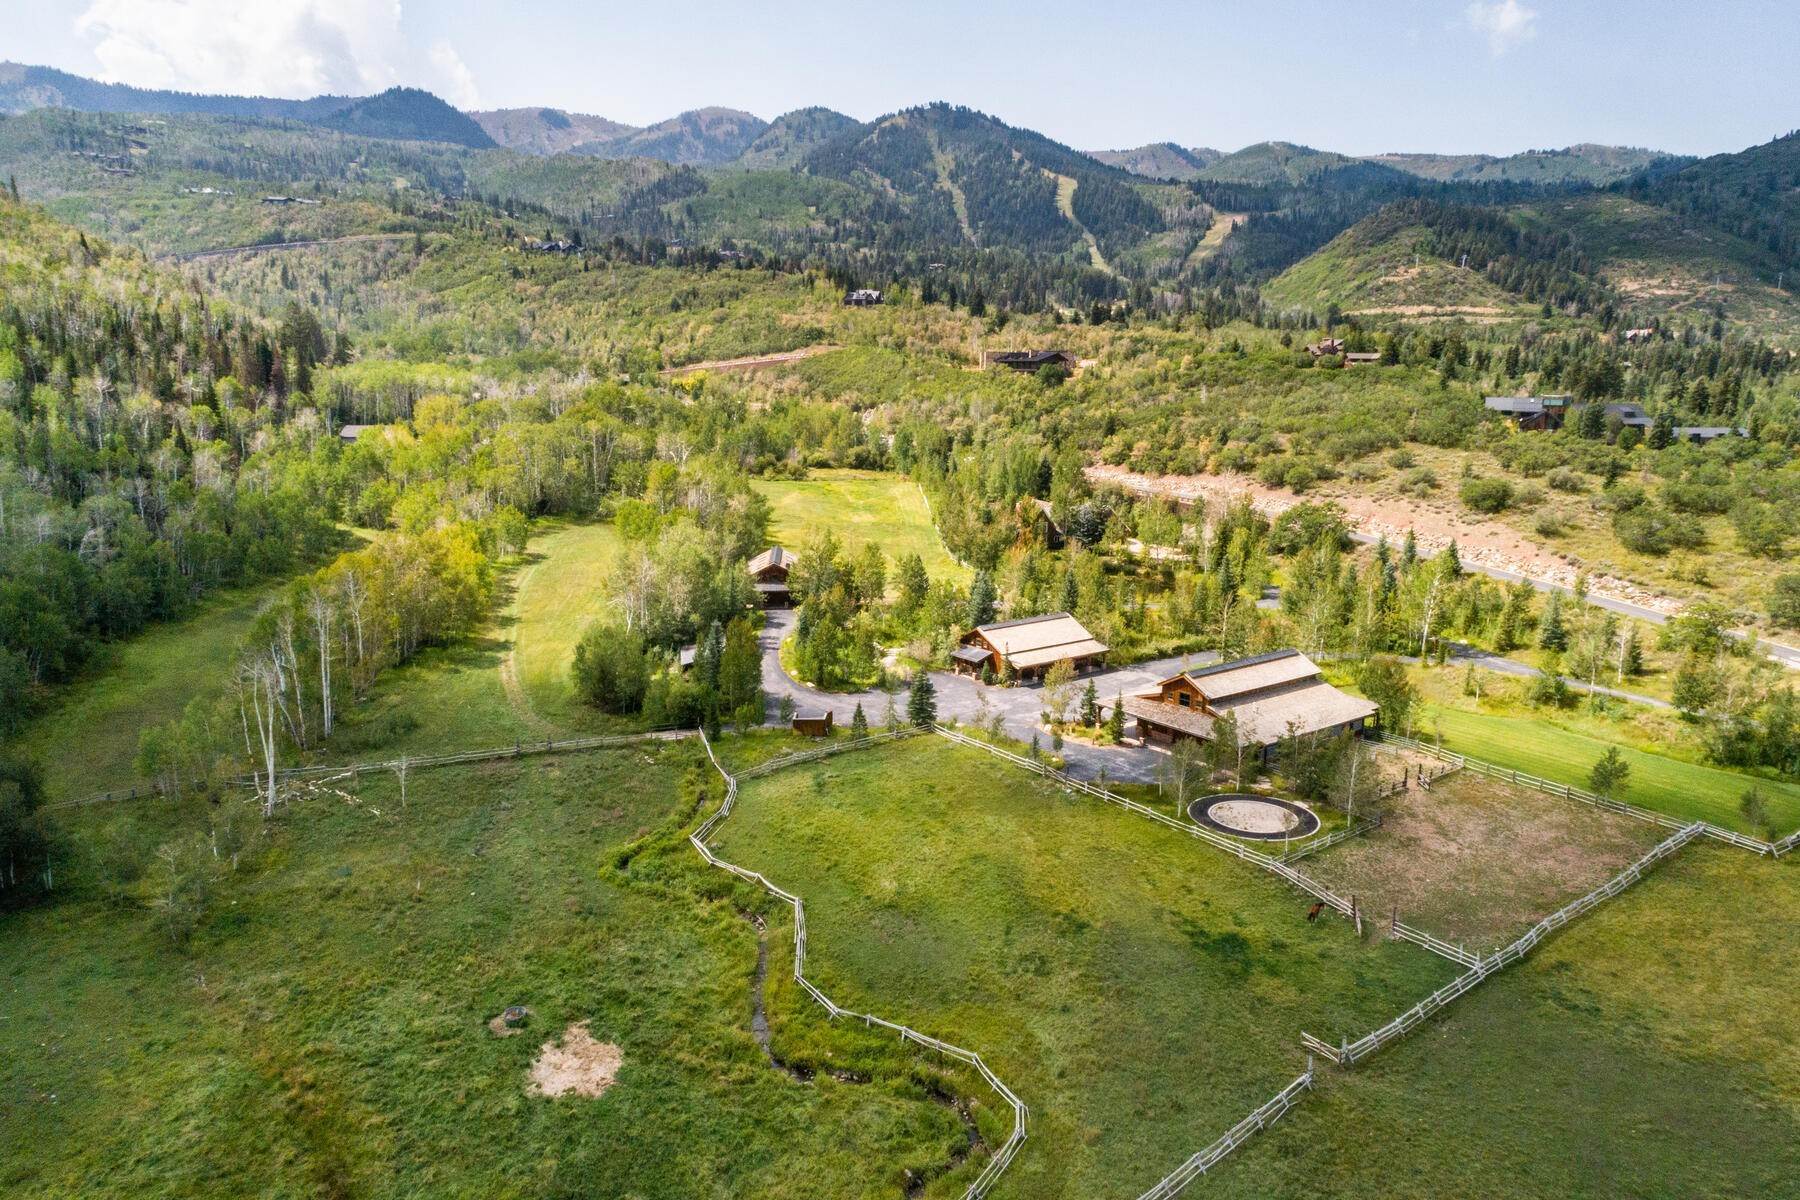 Farm and Ranch Properties for Sale at White Pine Canyon Ranch 2189 W White Pine Canyon Rd Park City, Utah 84060 United States